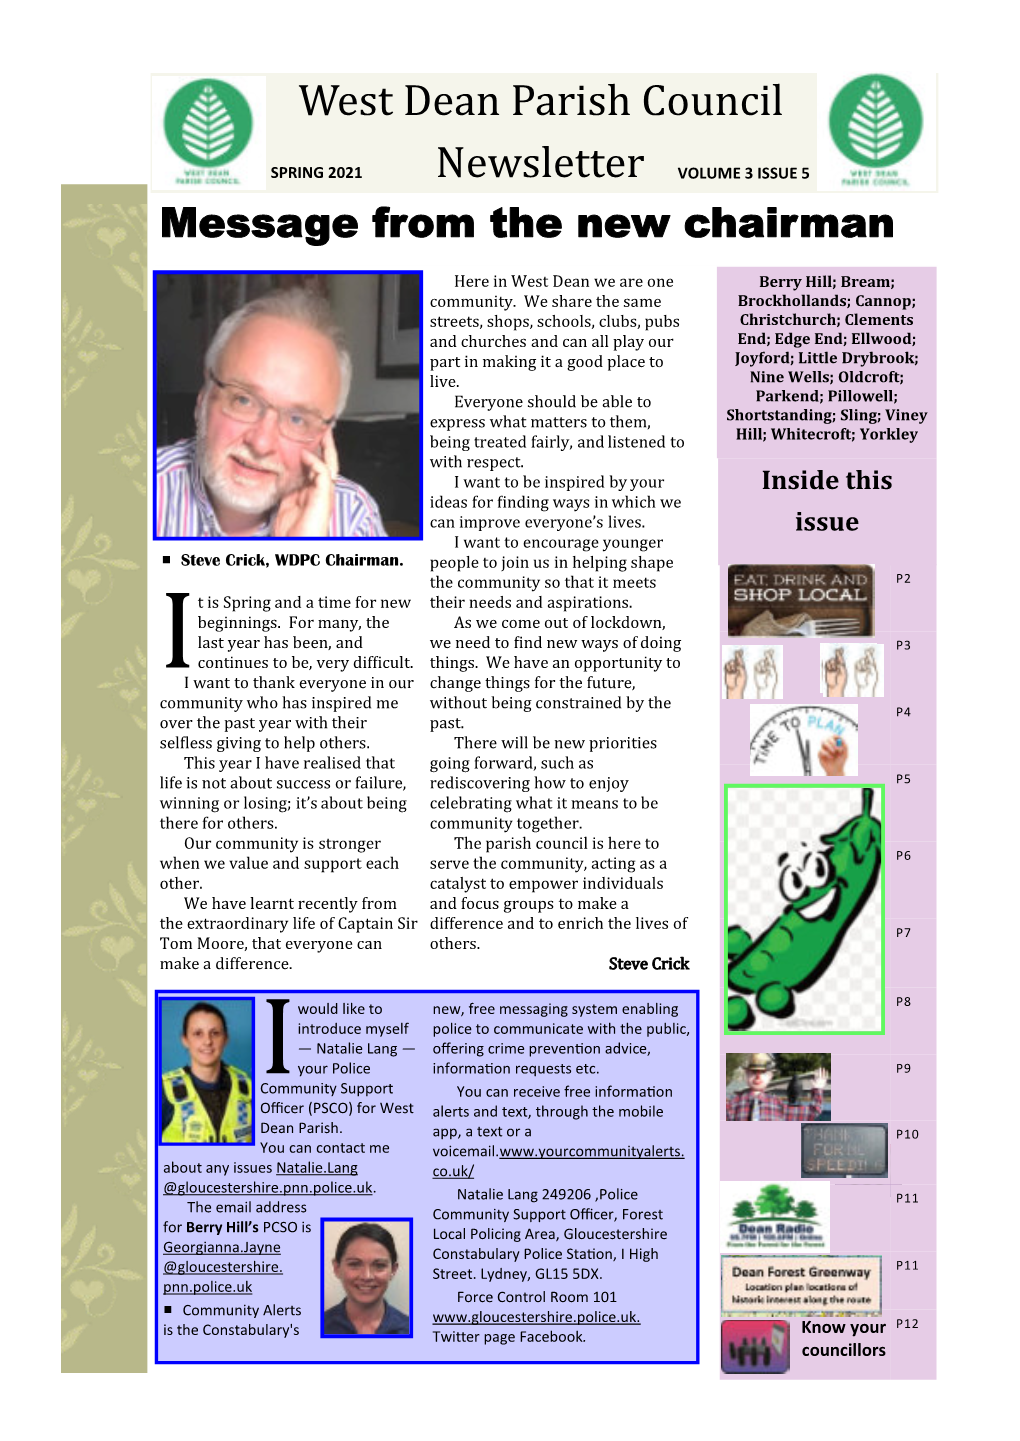 SPRING 2021 Newsletter VOLUME 3 ISSUE 5 Springmessage 2021 from the New Chairmanvolume 3 ISSUE5